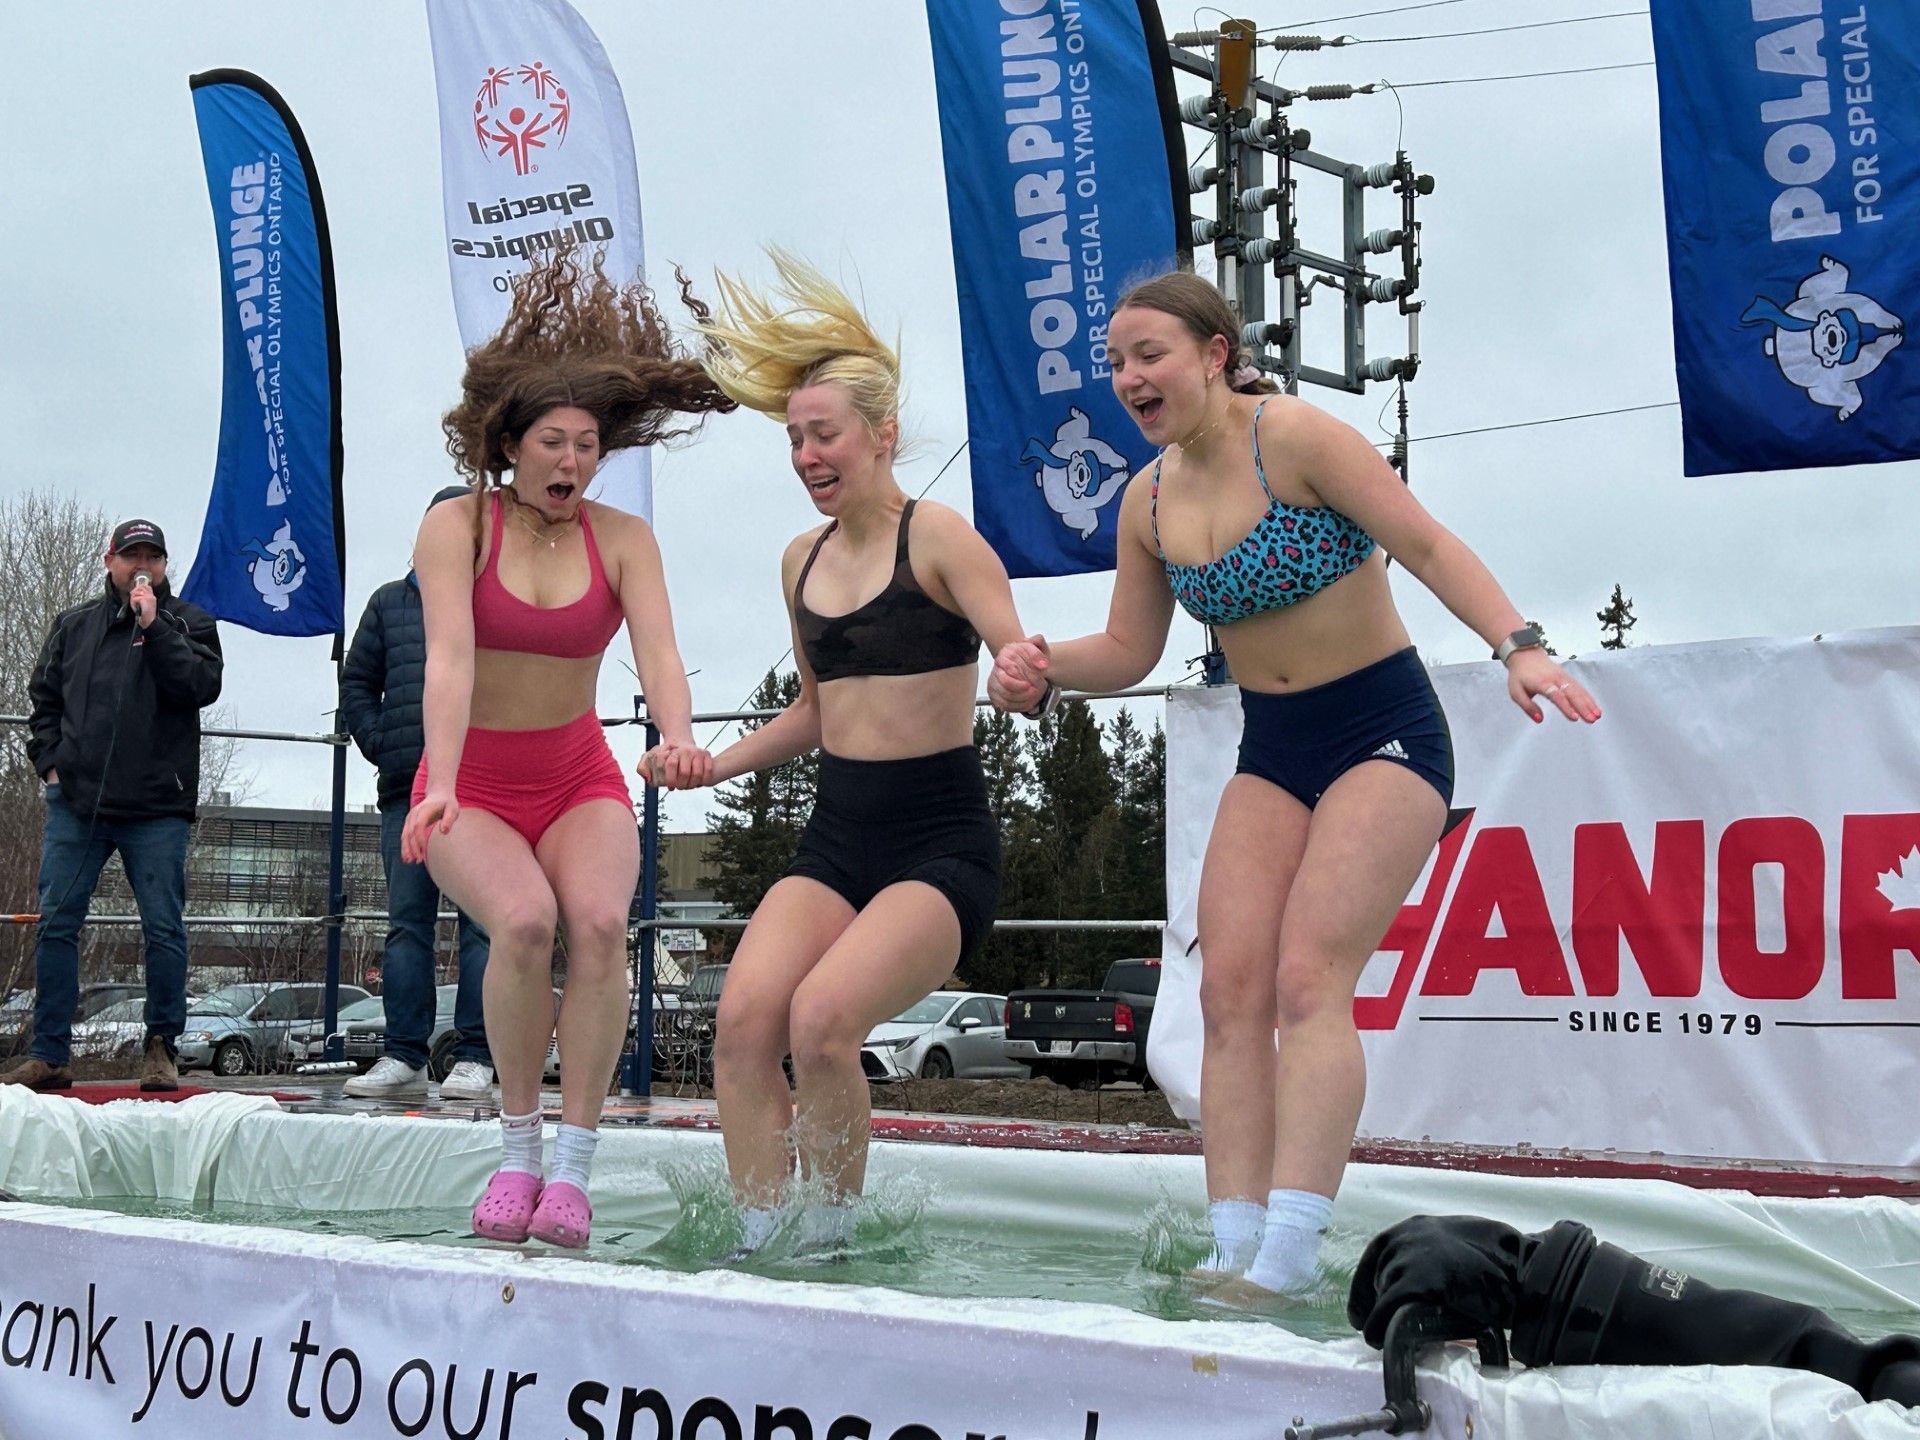 Special Olympics receives $30,000 from polar plunge